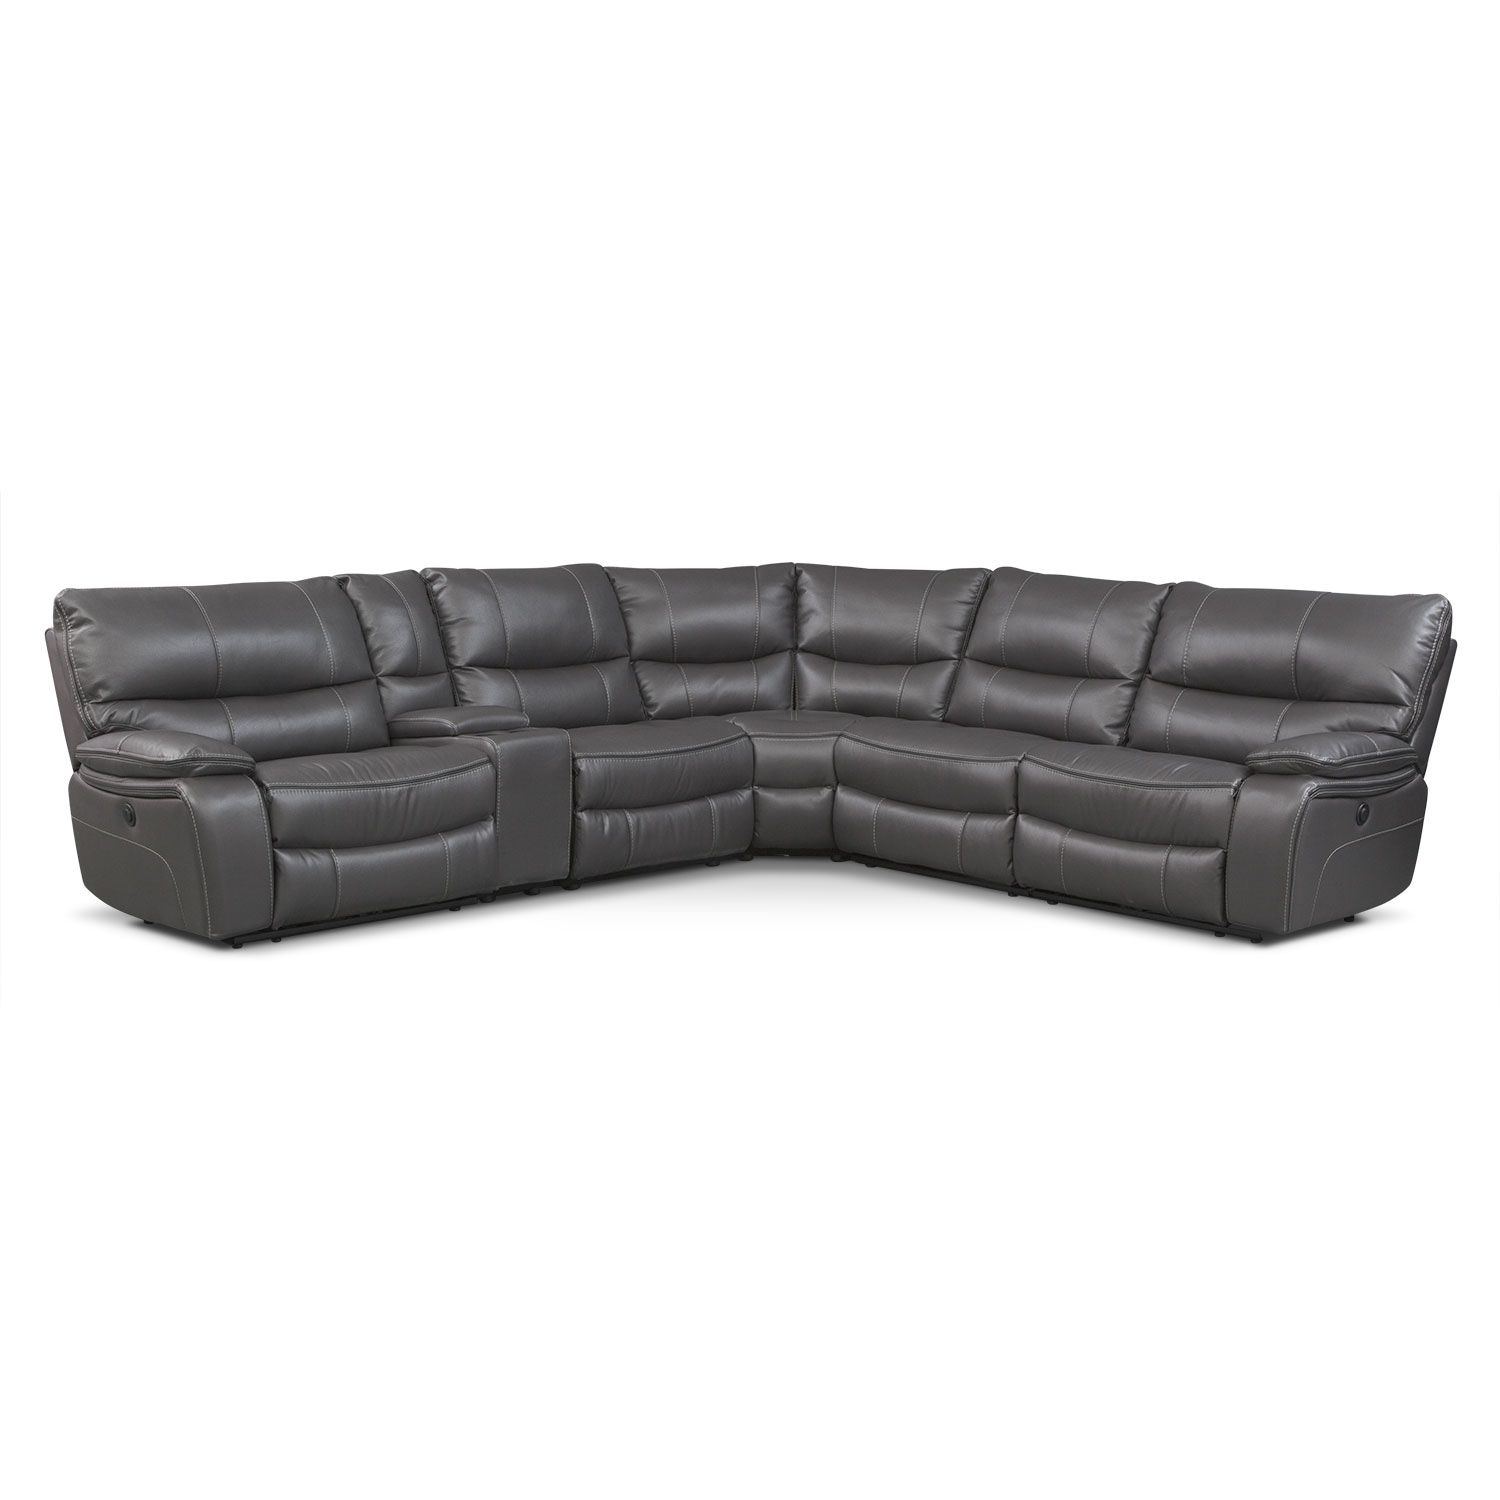 The Orlando Collection – Gray | American Signature Furniture Throughout Orlando Sectional Sofas (View 4 of 10)